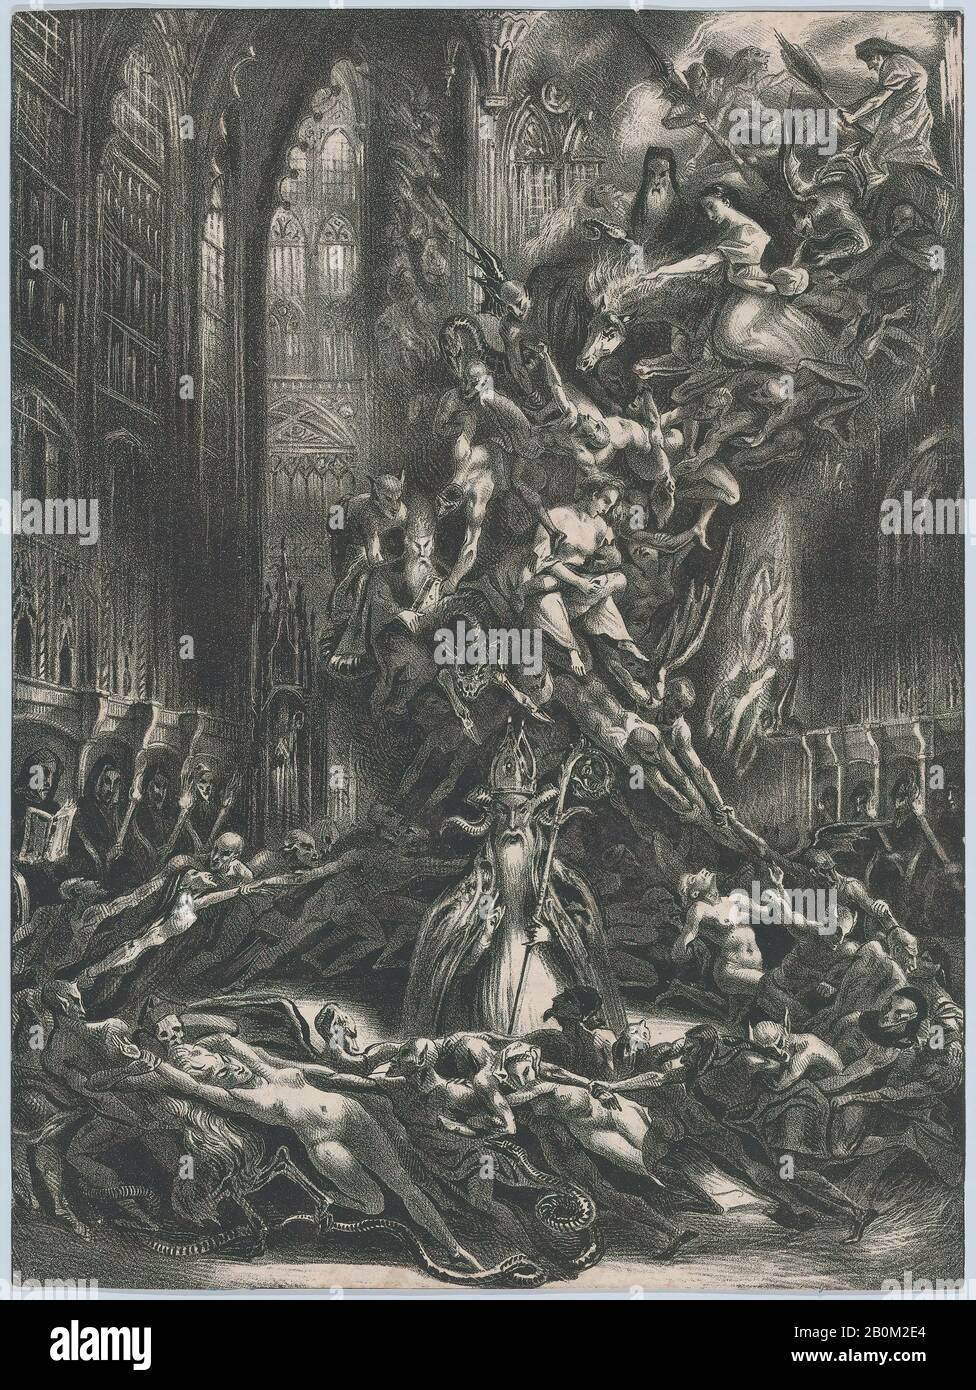 Louis Boulanger, The Round of the Sabbath or Witches' Sabbath, Louis Boulanger (French, 1807–1867 Dijon), 1835, Lithograph, Sheet (trimmed): 7 7/8 × 10 9/16 in. (20 × 26.9 cm), Prints Stock Photo